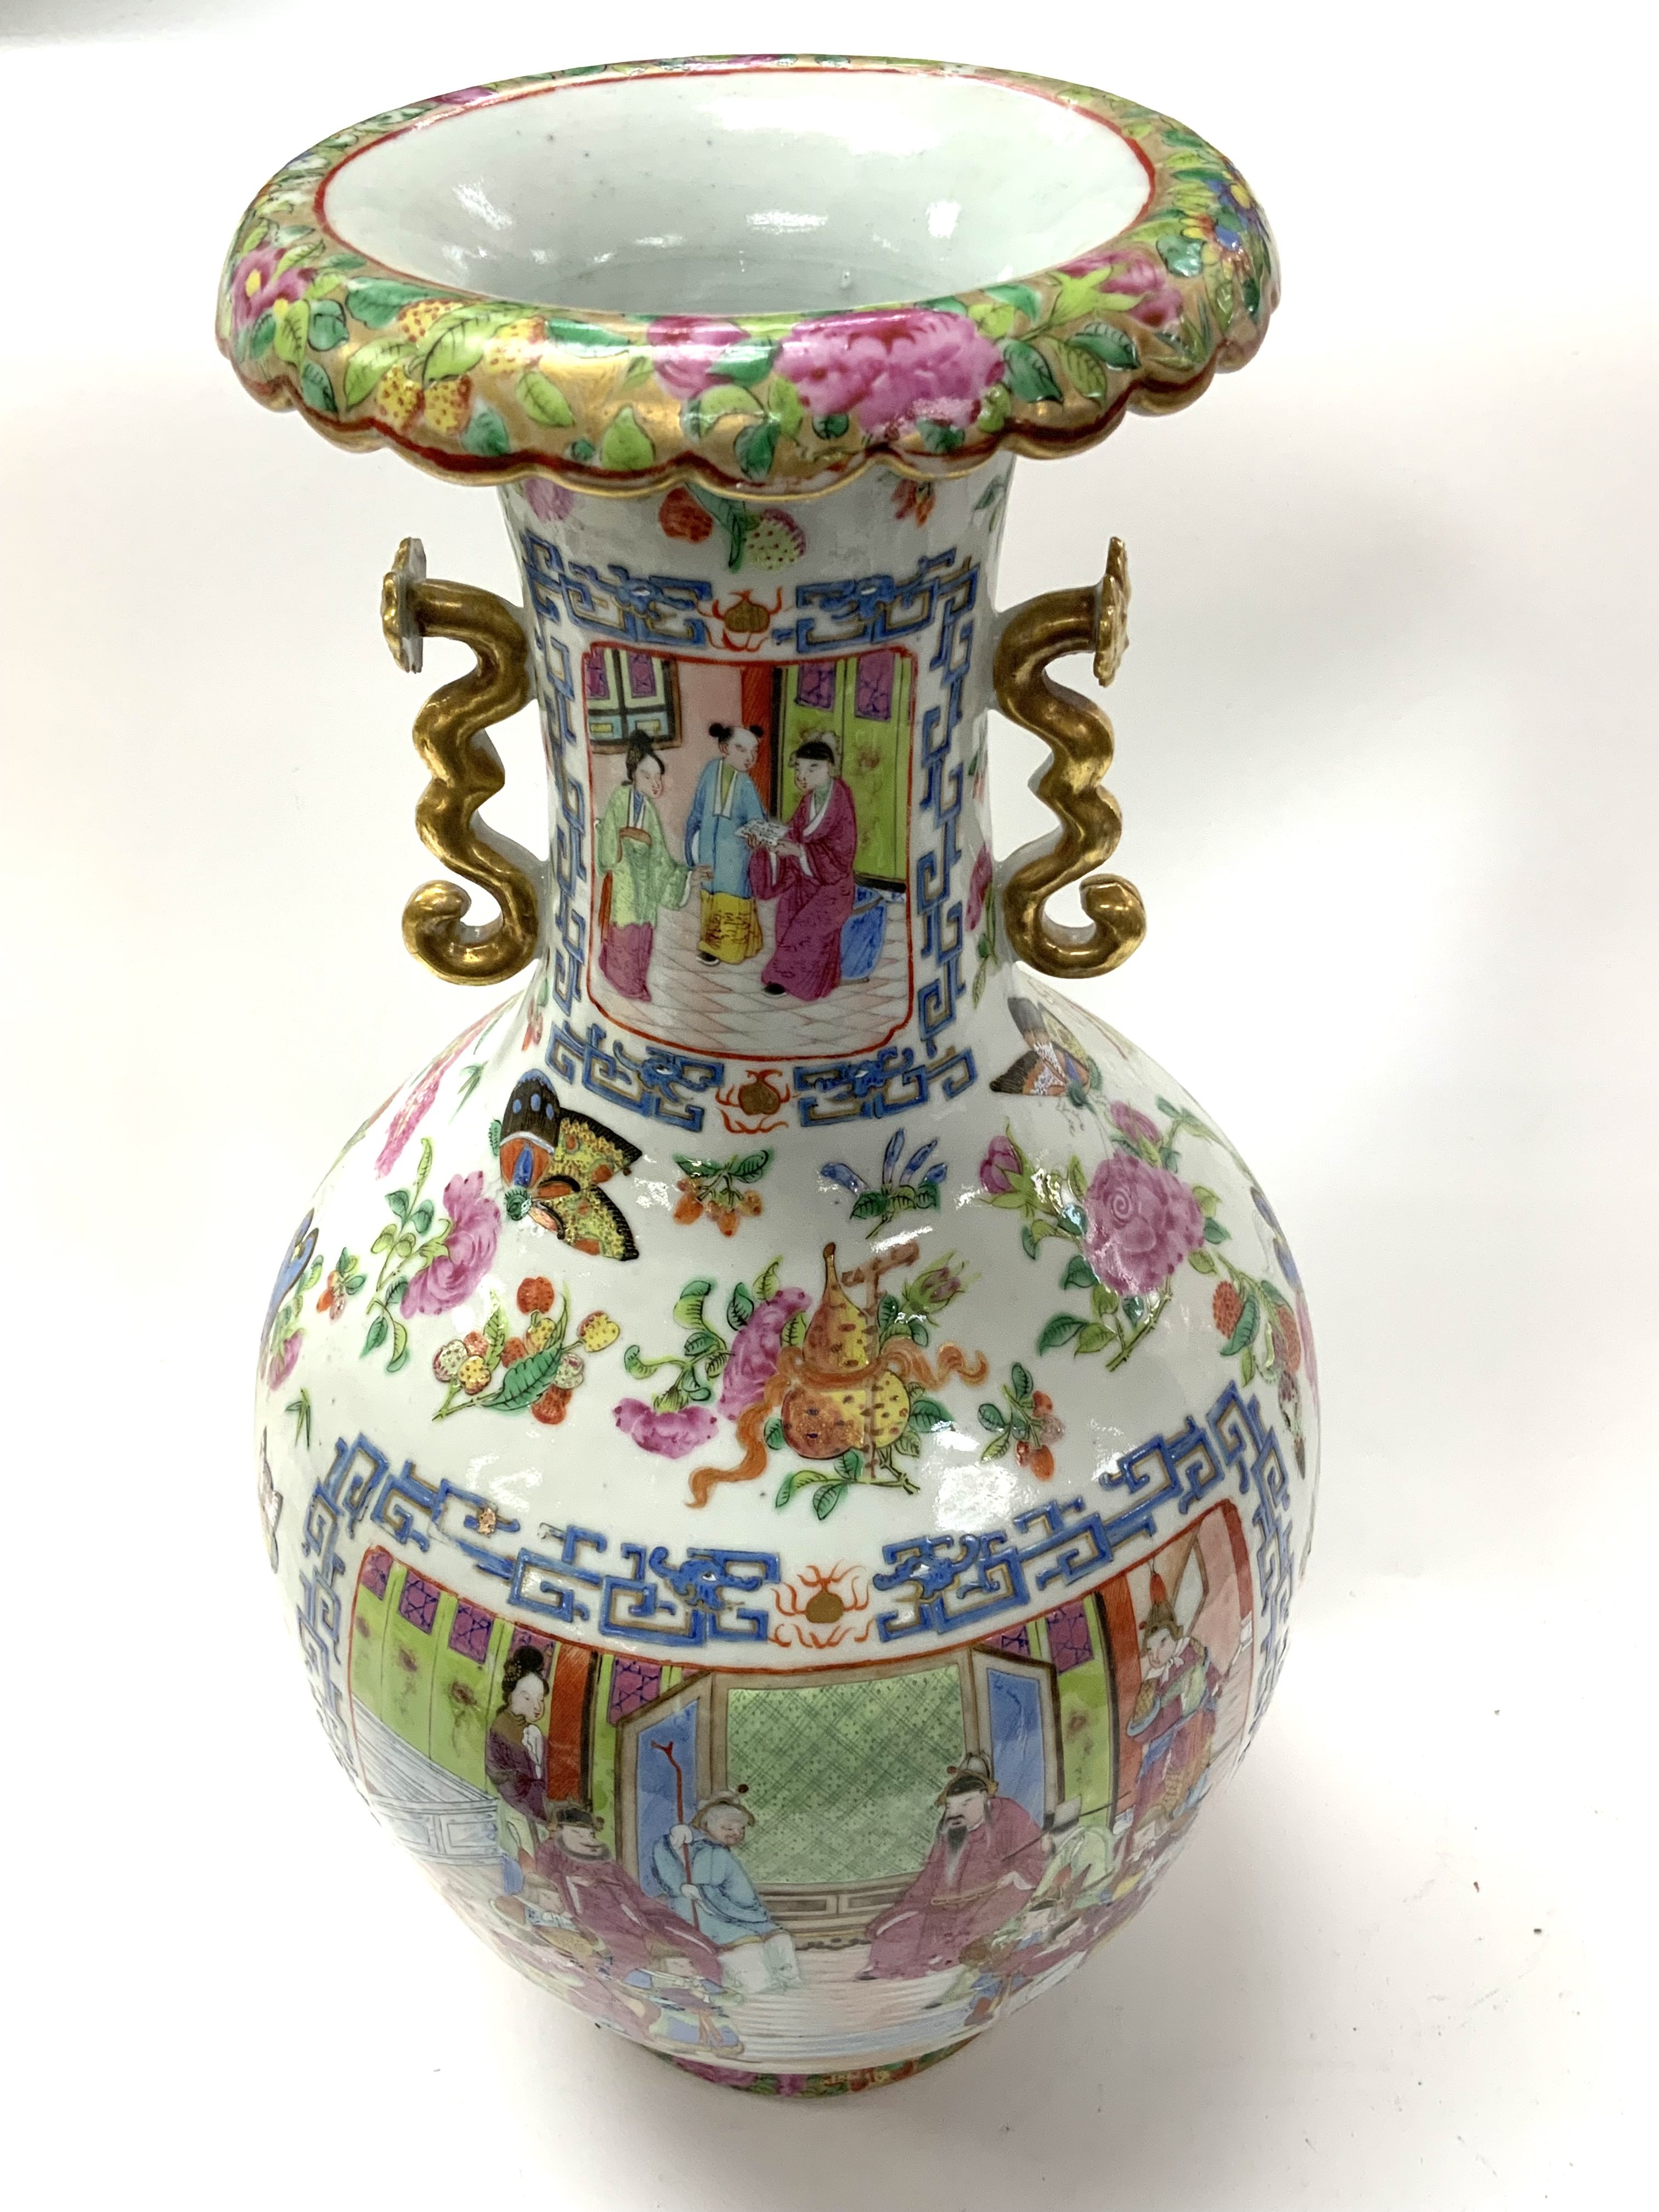 A 19thC Chinese Cantonese enamelled vase with Ruyi